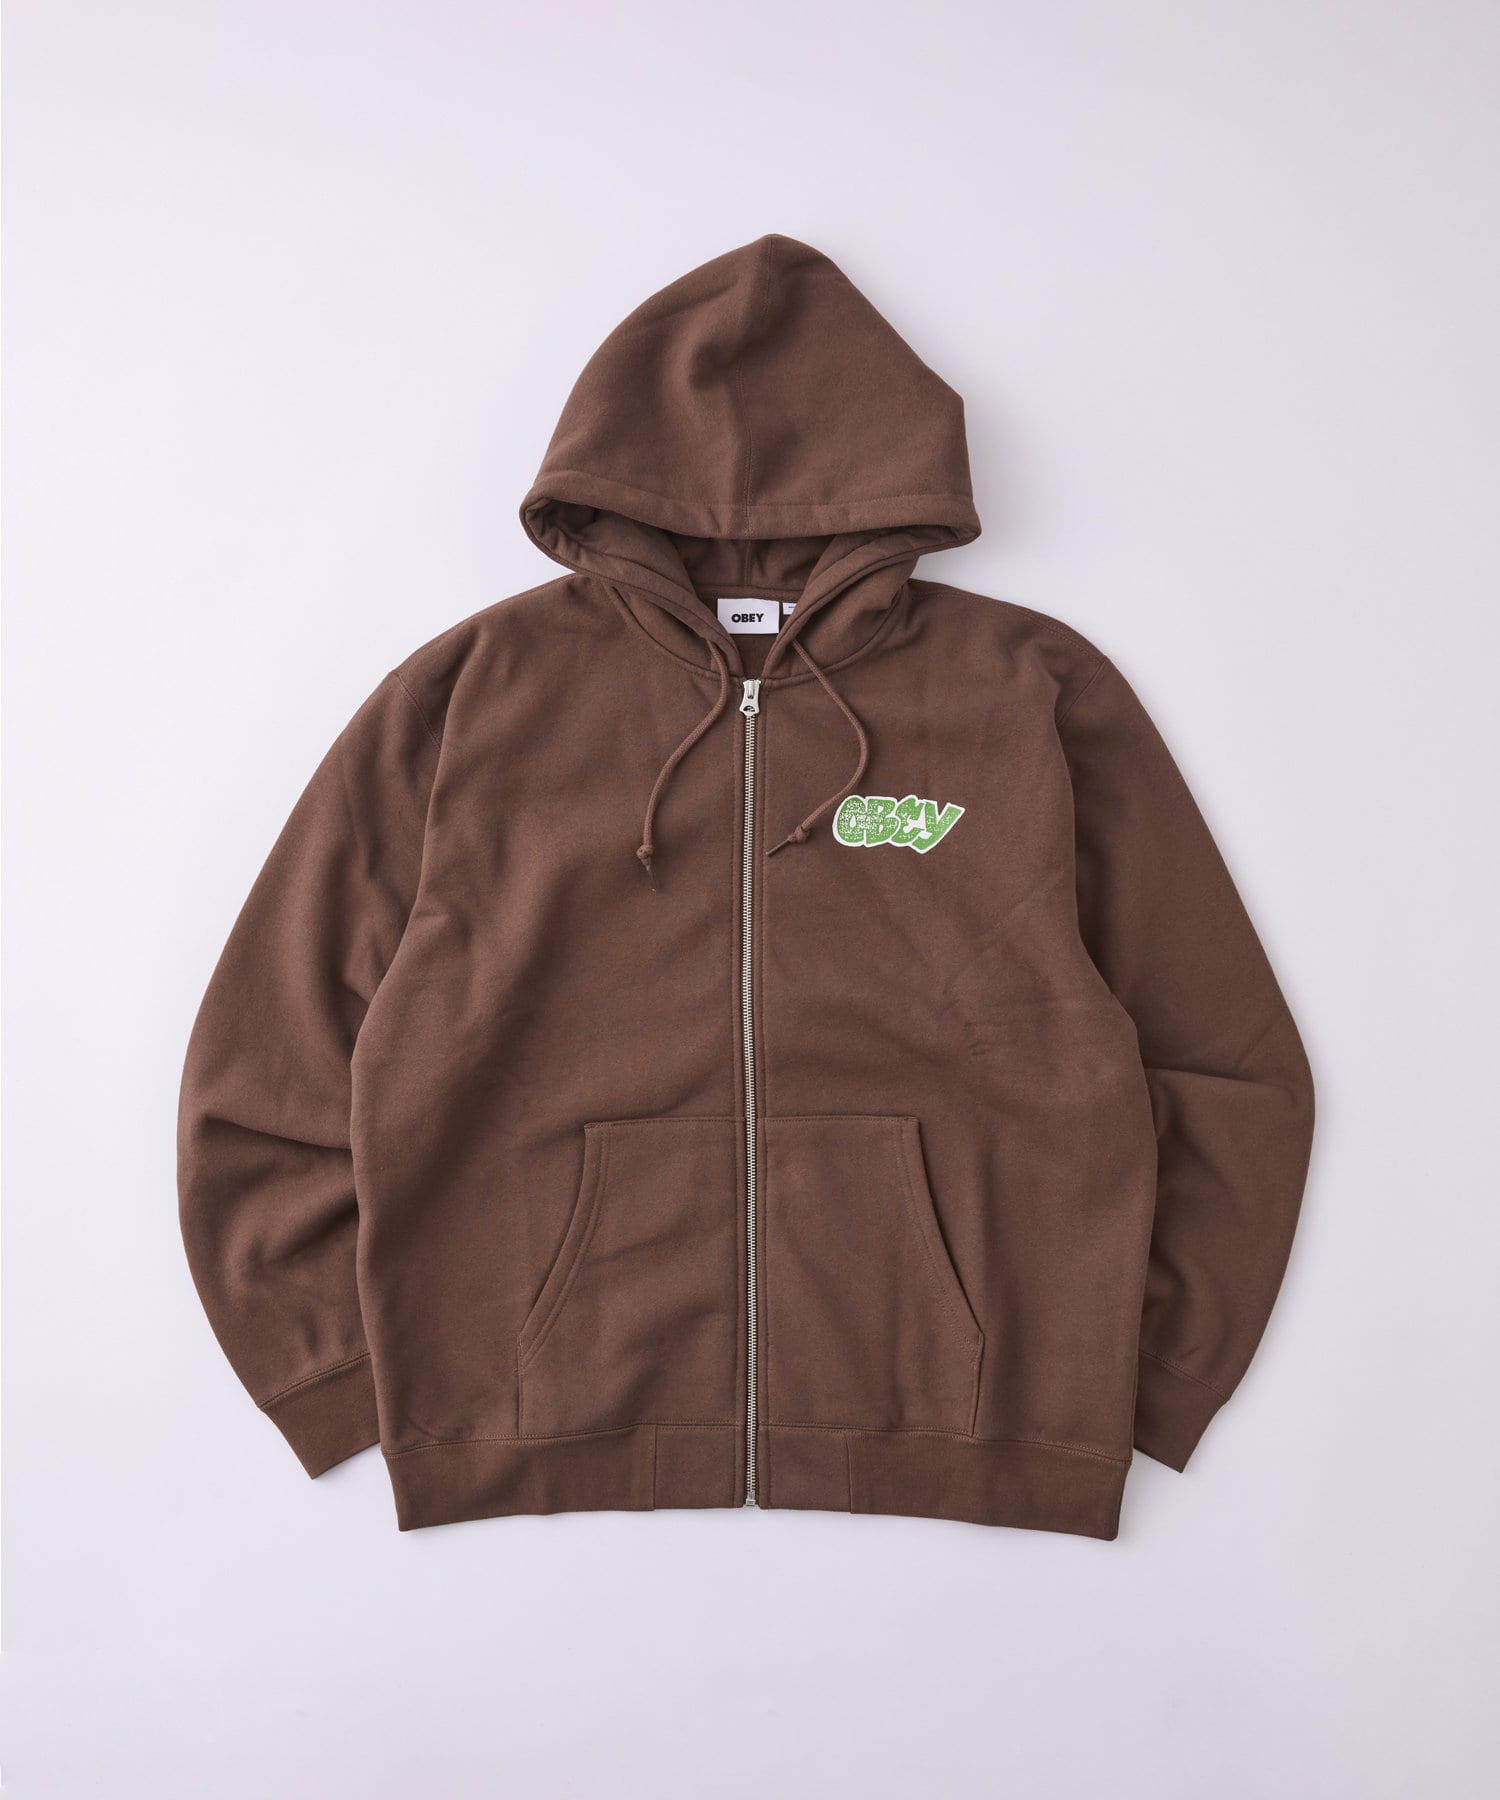 WHO’S WHO gallery(フーズフーギャラリー) OBEY CITY WATCH DOG ZIP HOOD